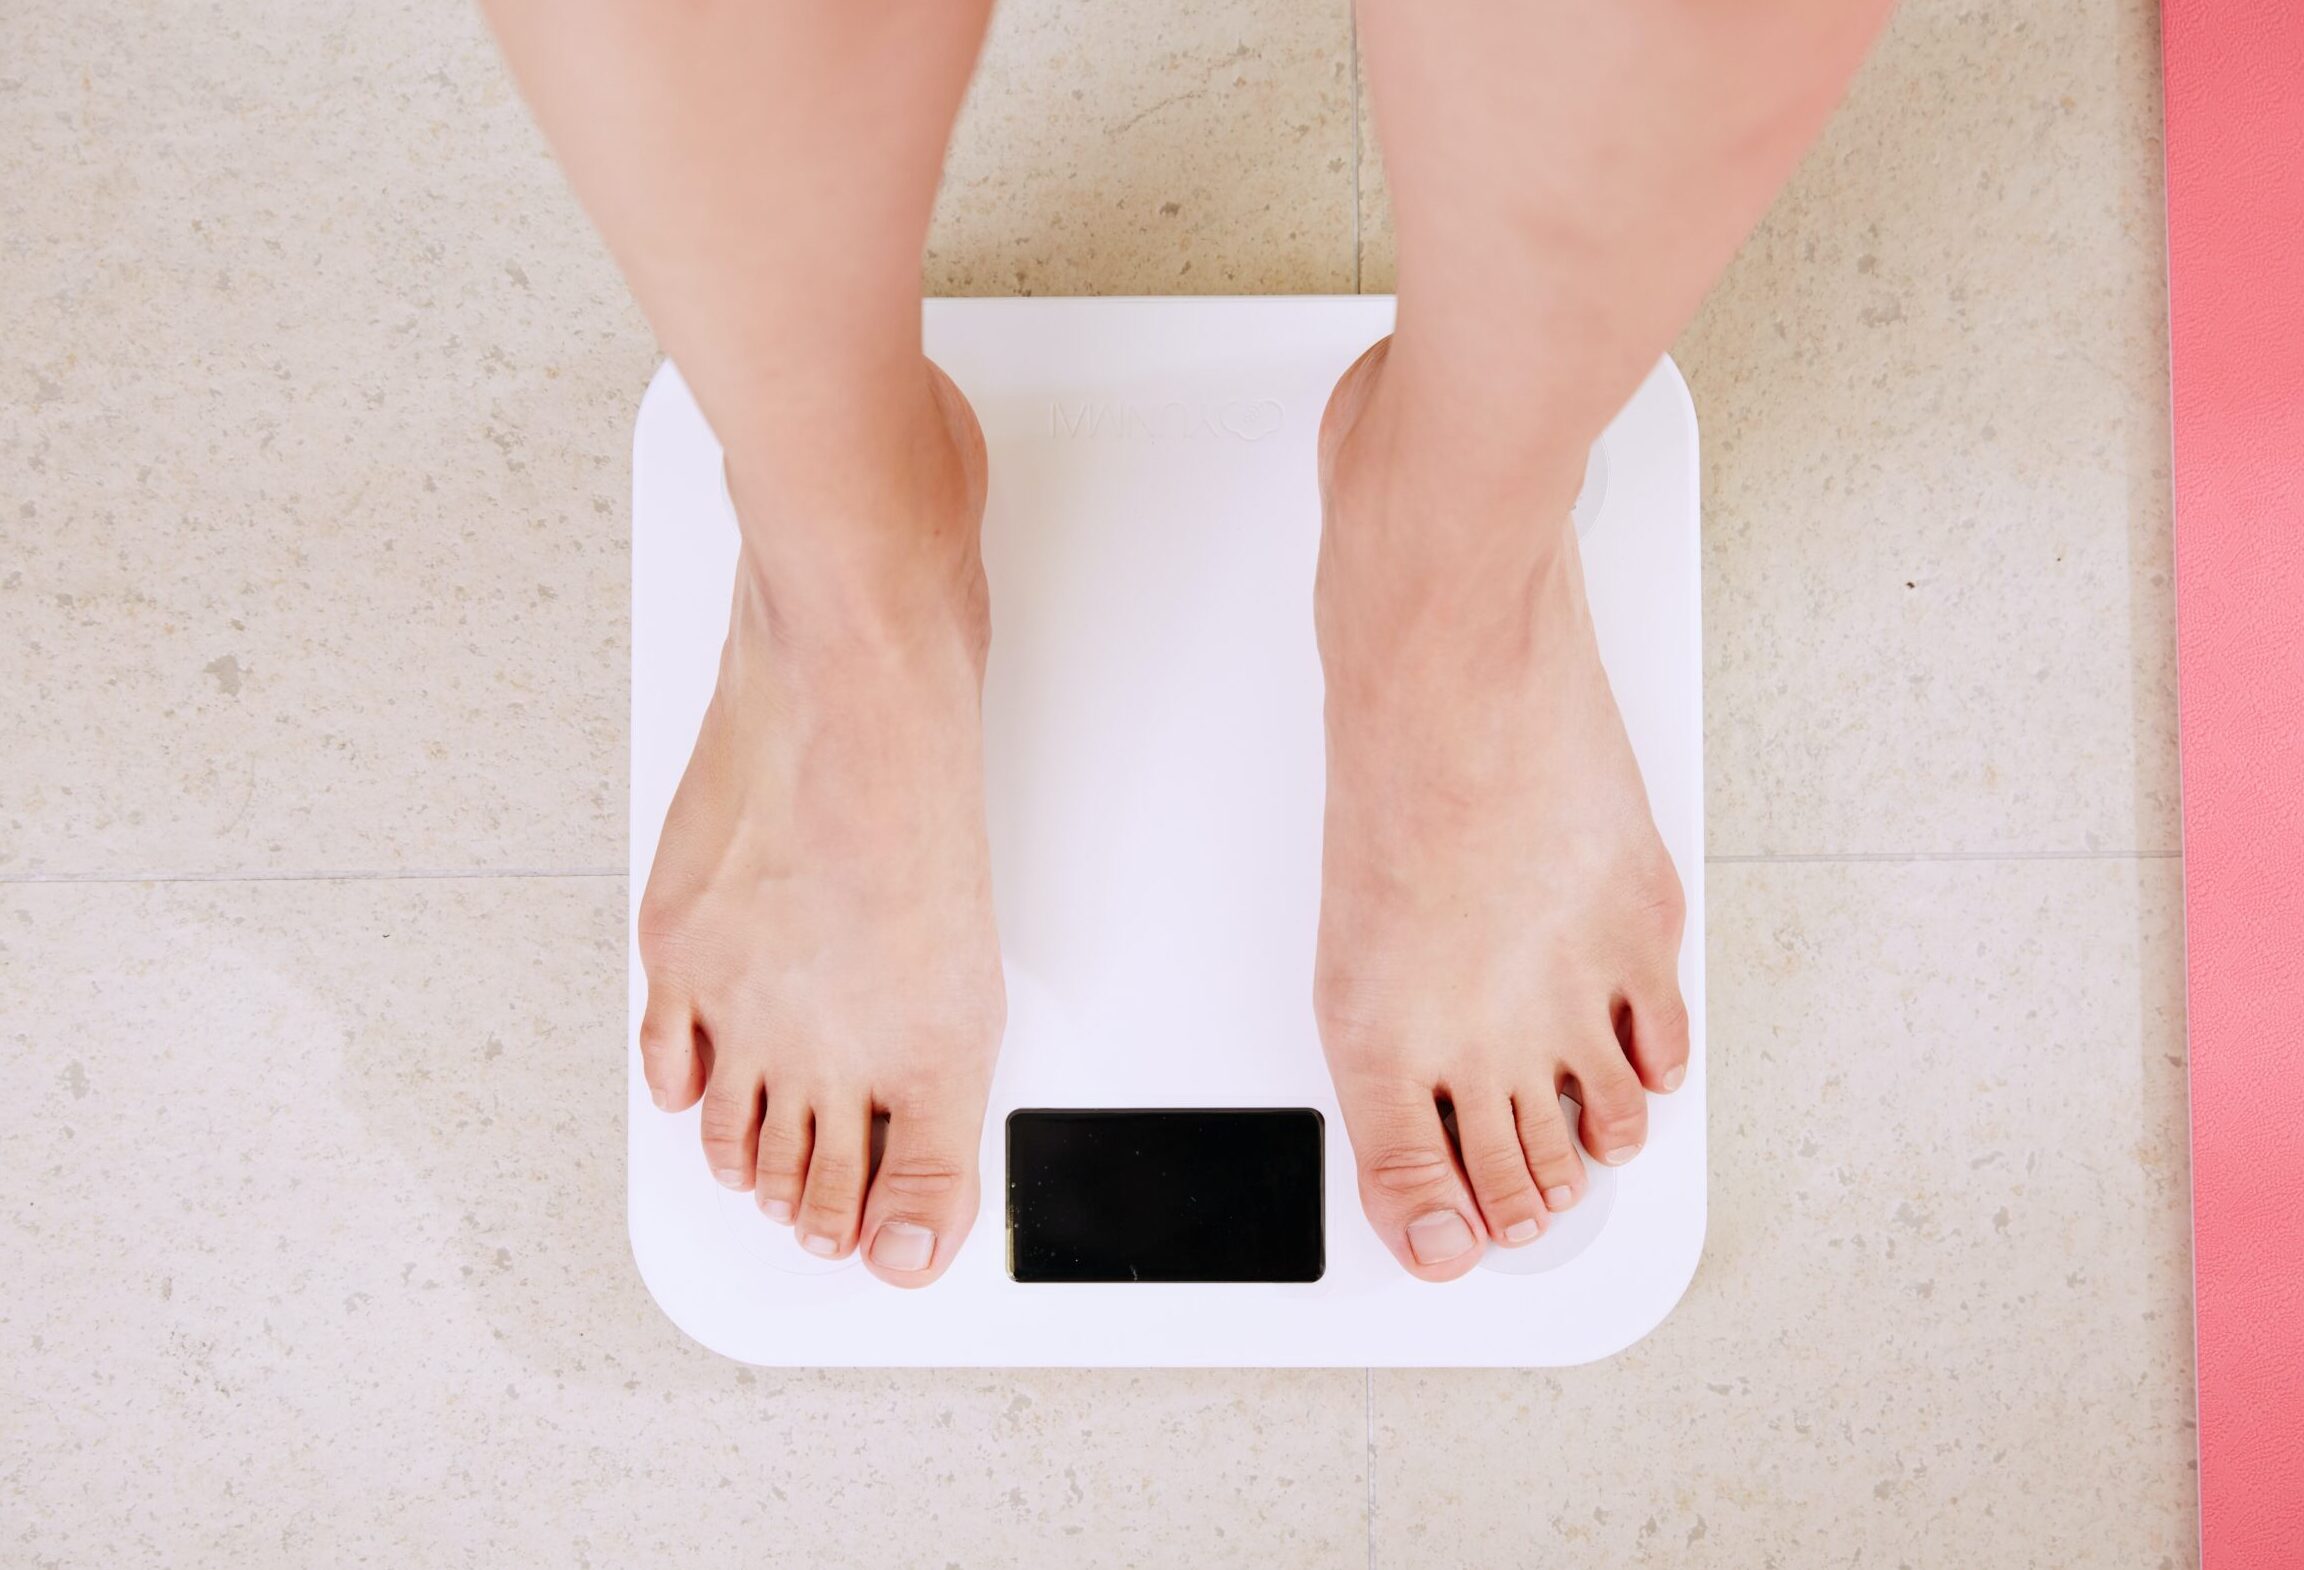 The Best Way to Lose Weight Is Not What You’ve Been Told